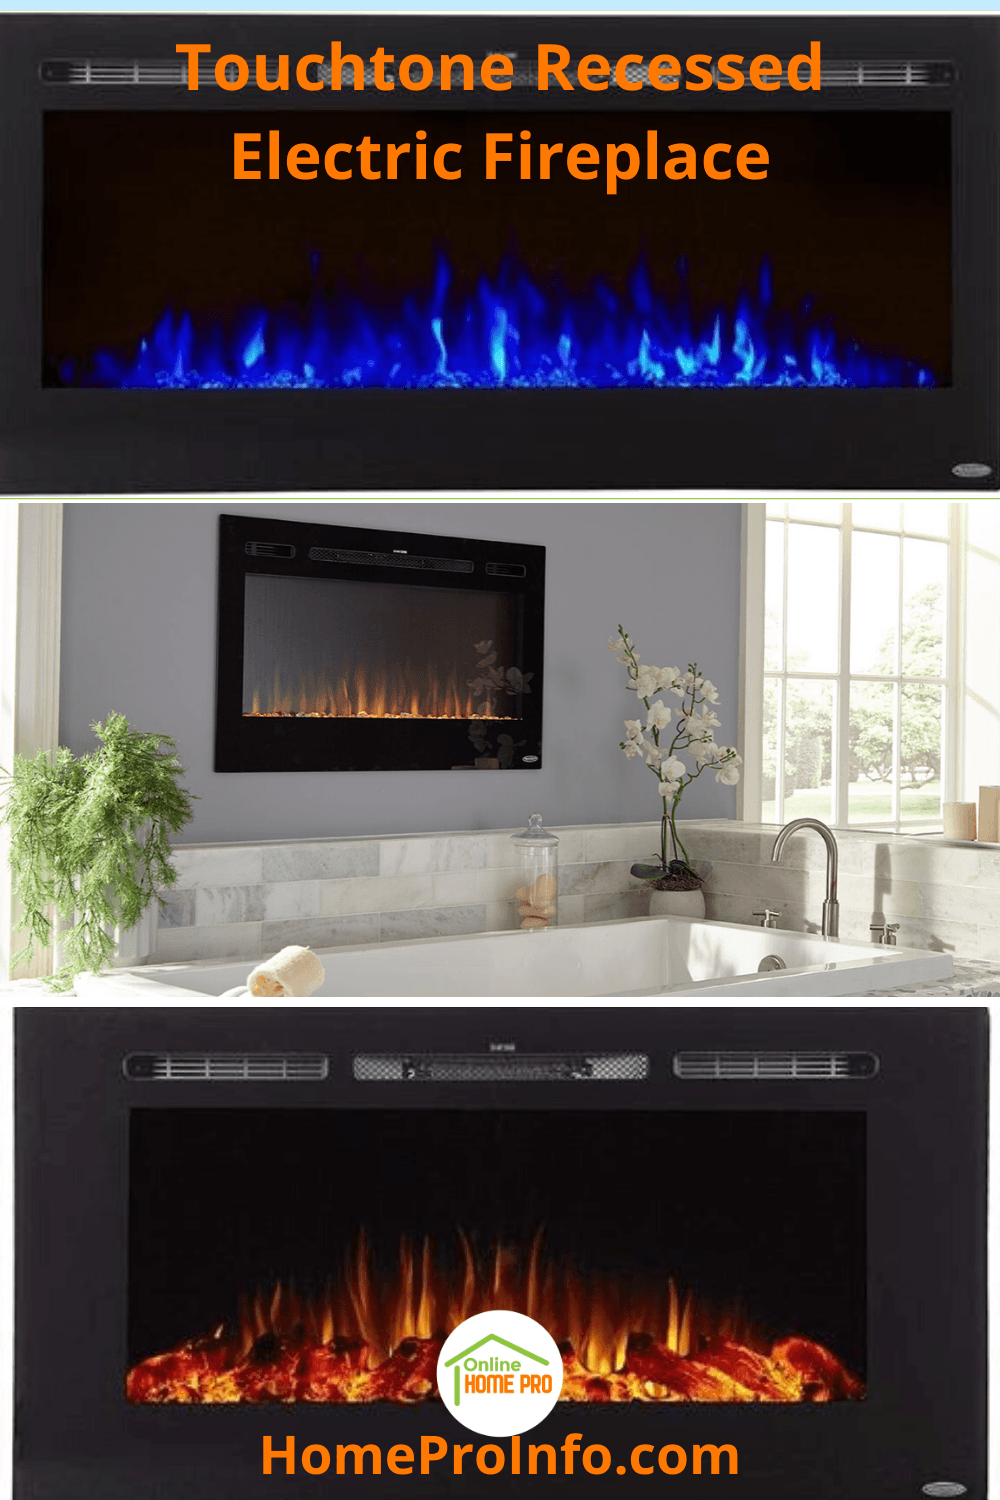 touchstone recessed electric fireplace